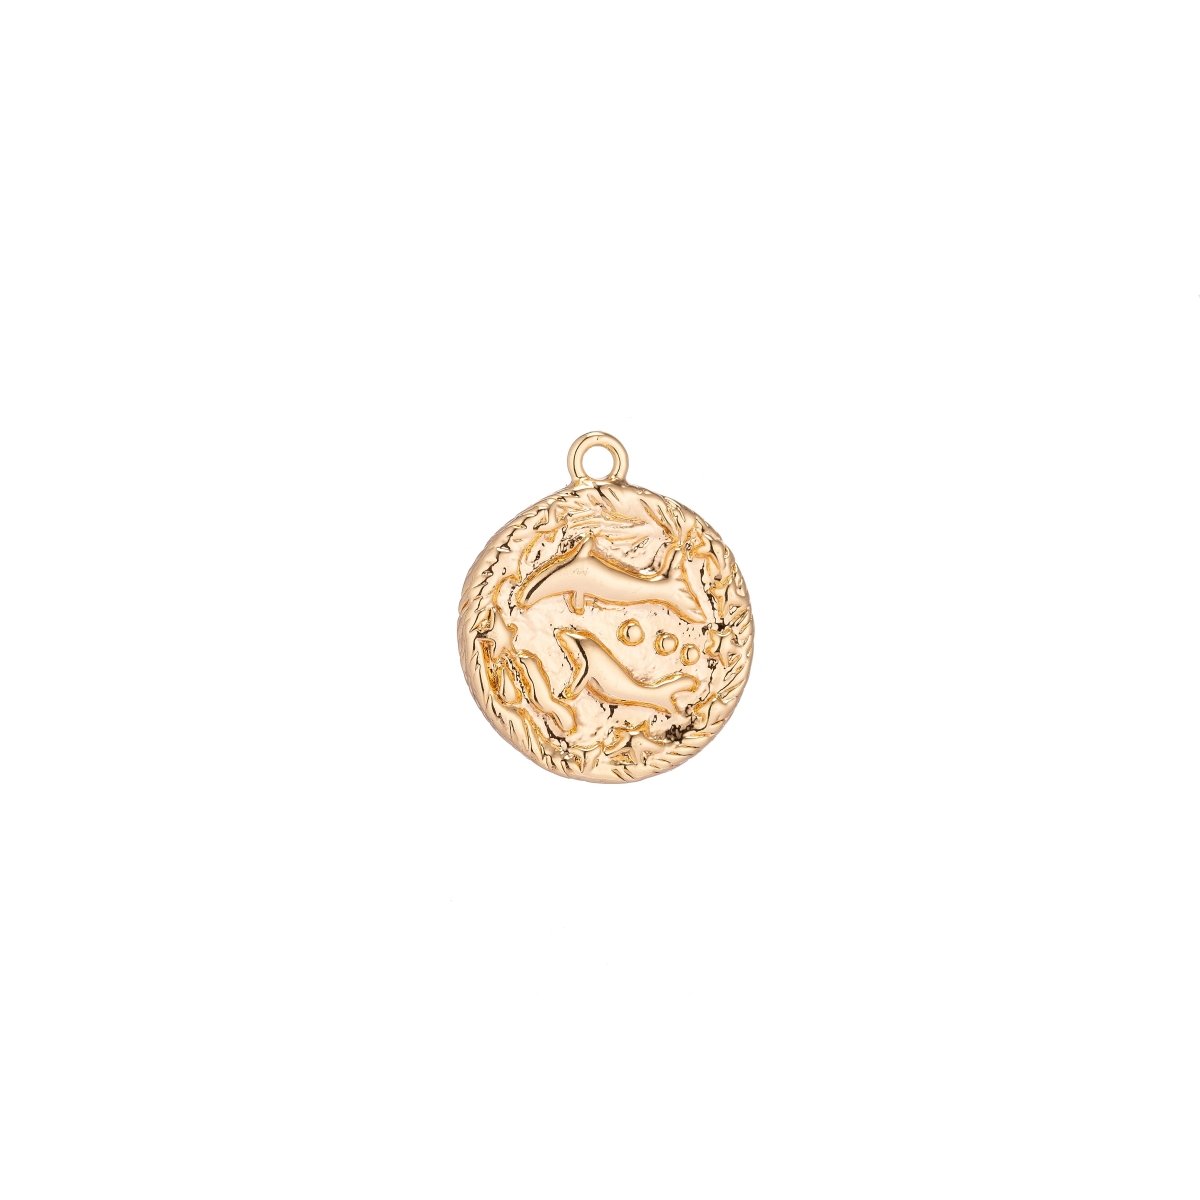 18K Gold Filled Small Size Zodiac Horoscope Sign Constellation Medallion Pendant Charm Rustic Rough Hammered Coin for Necklace Jewelry Making - DLUXCA